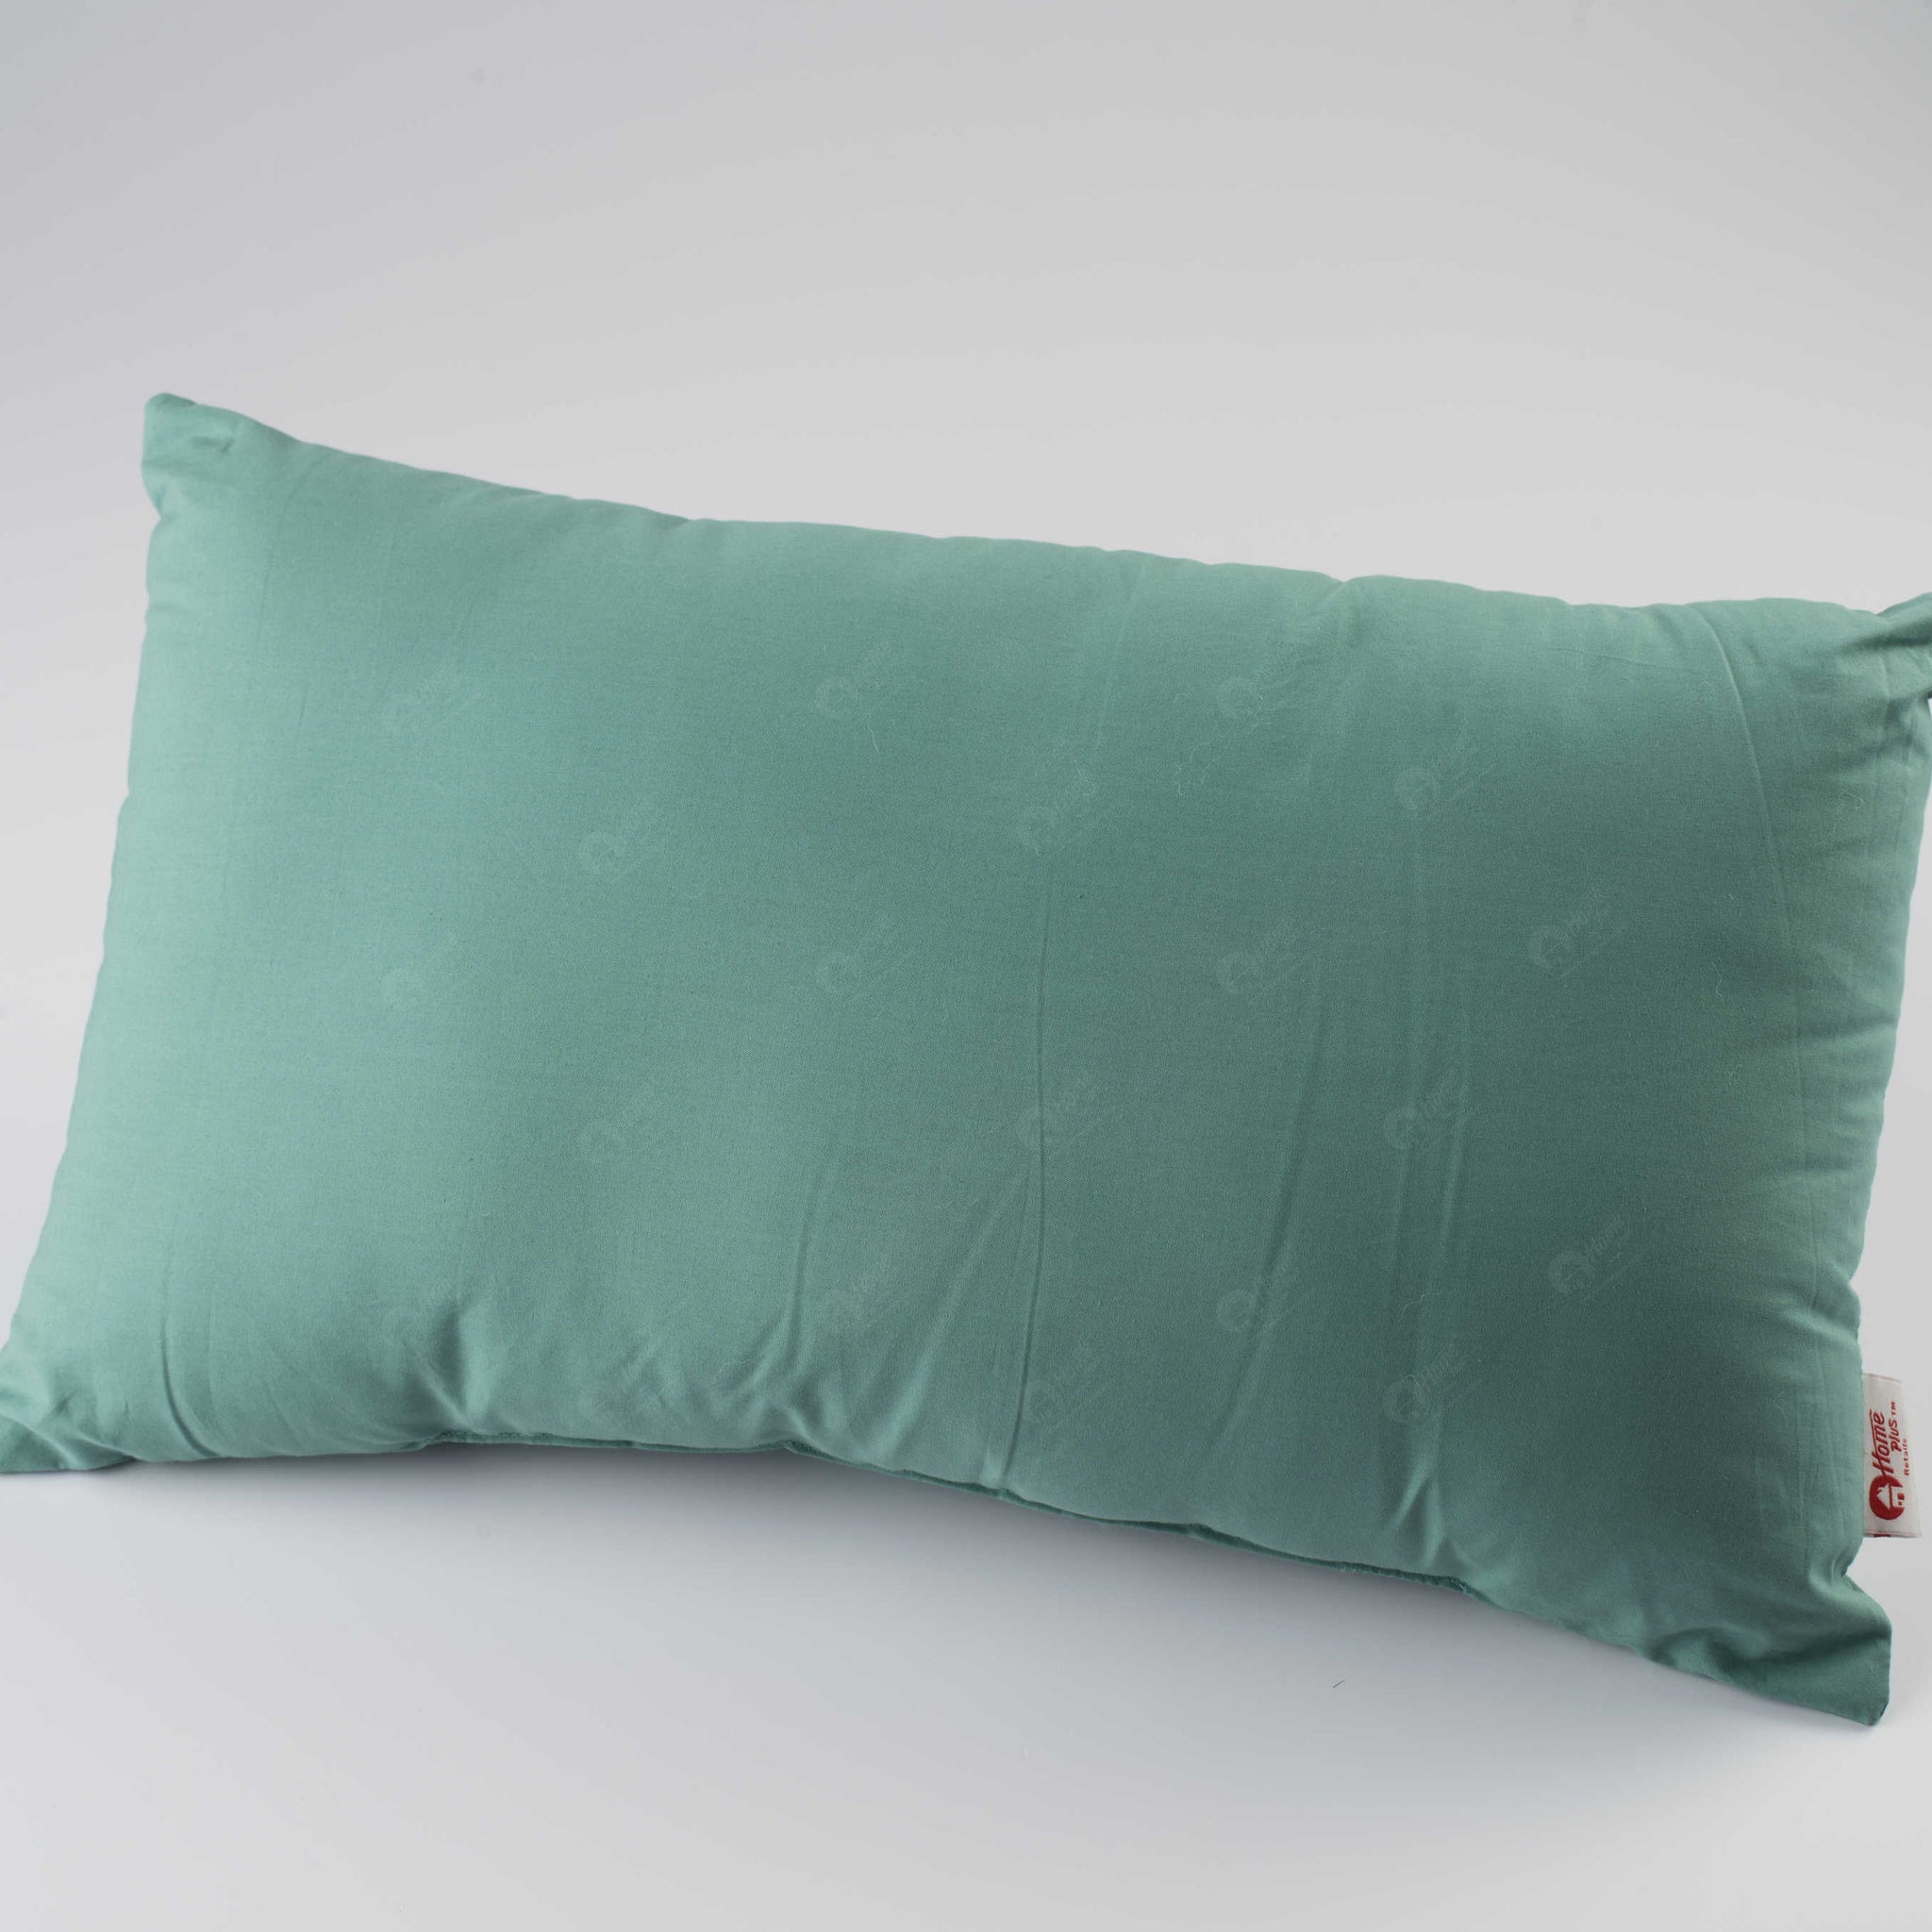 Pillow - Solid Teal